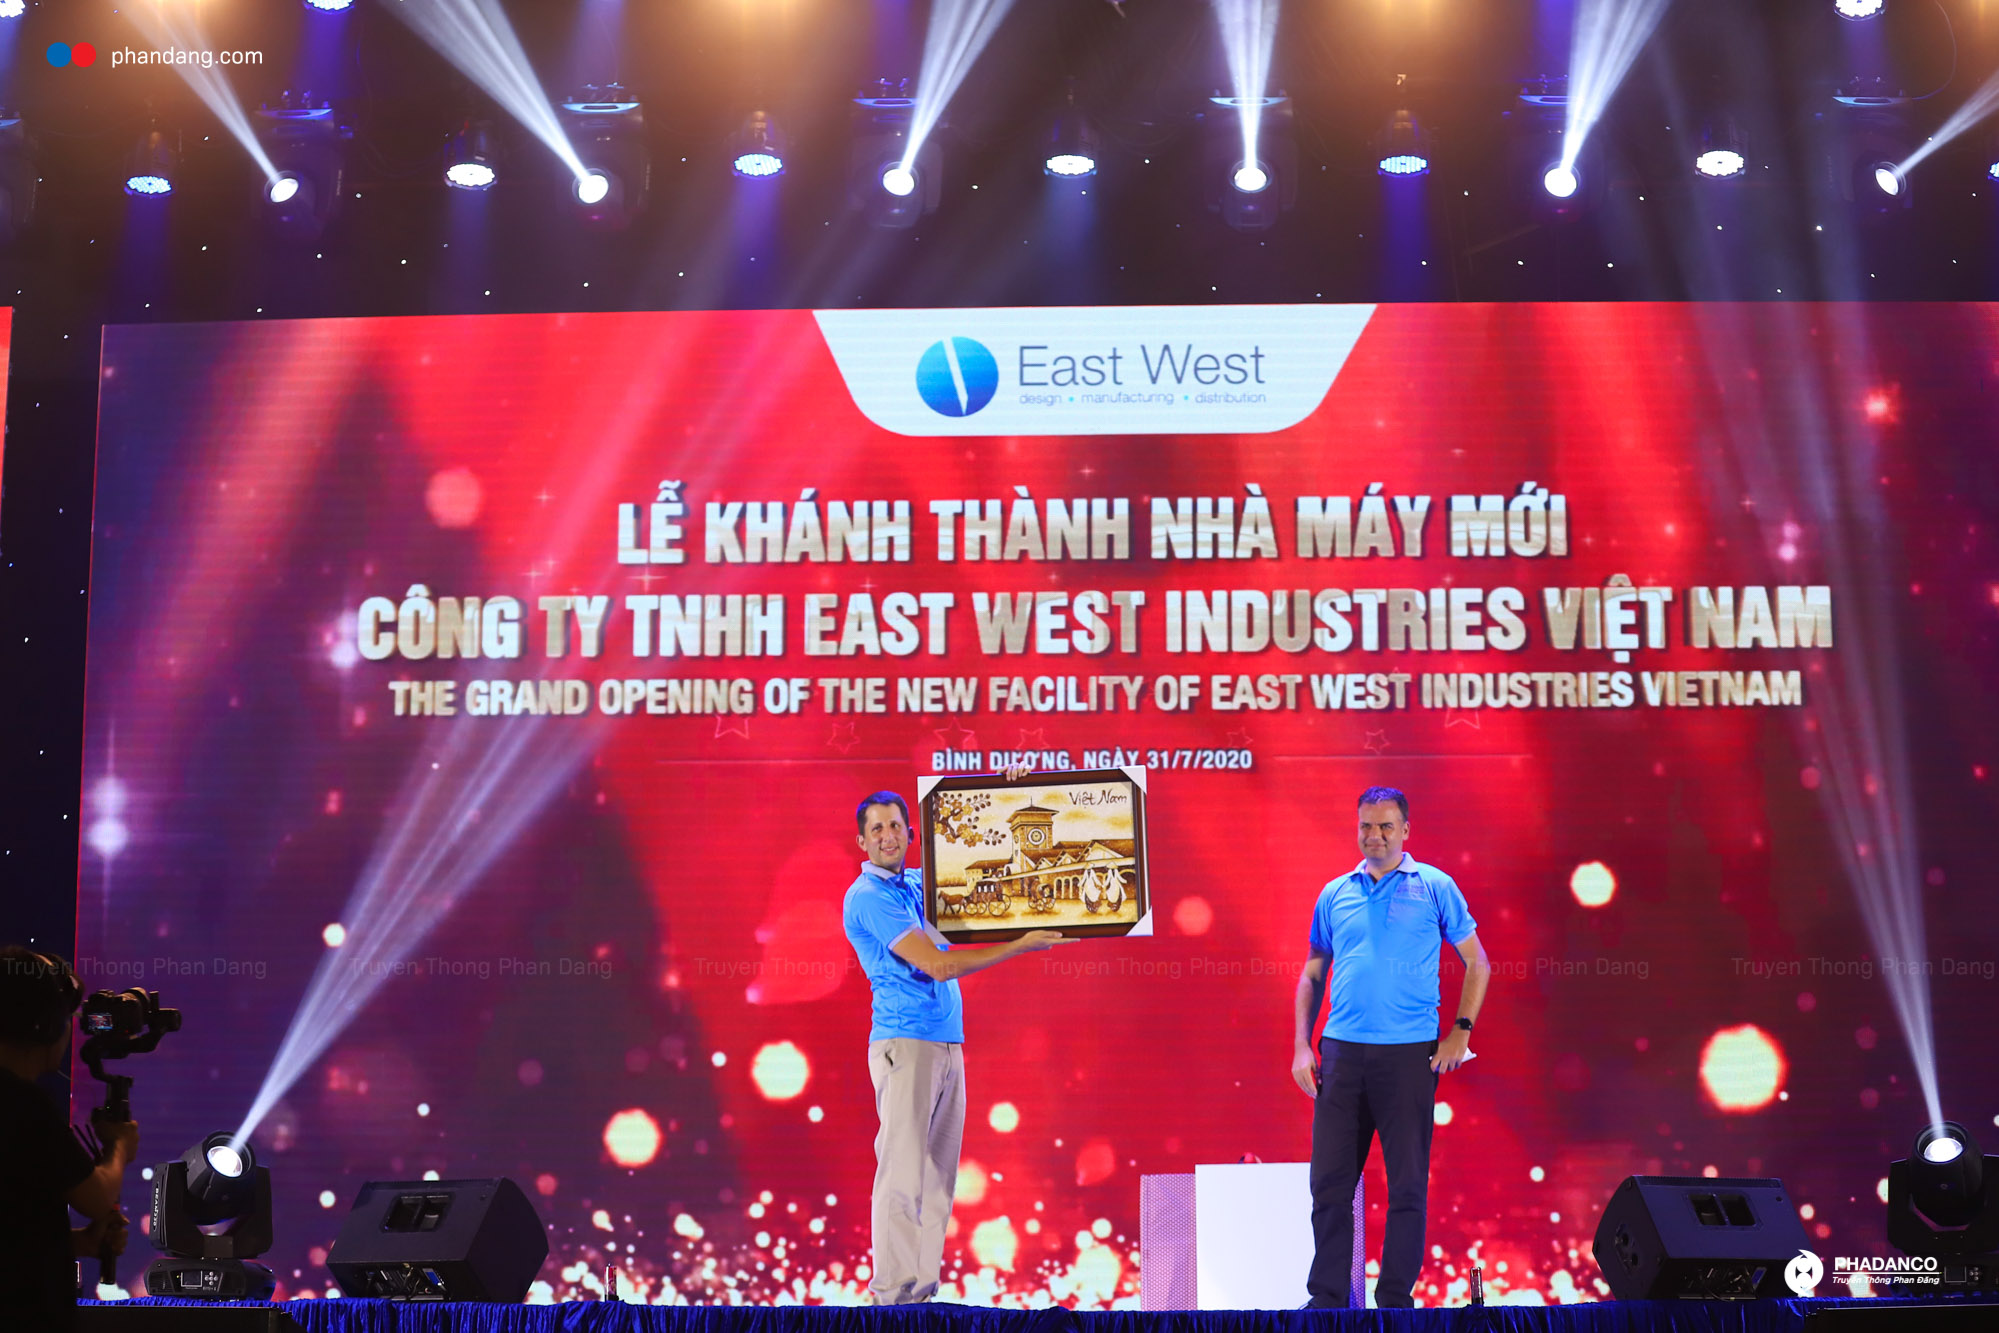 le khanh thanh nha may east west industries 10 2